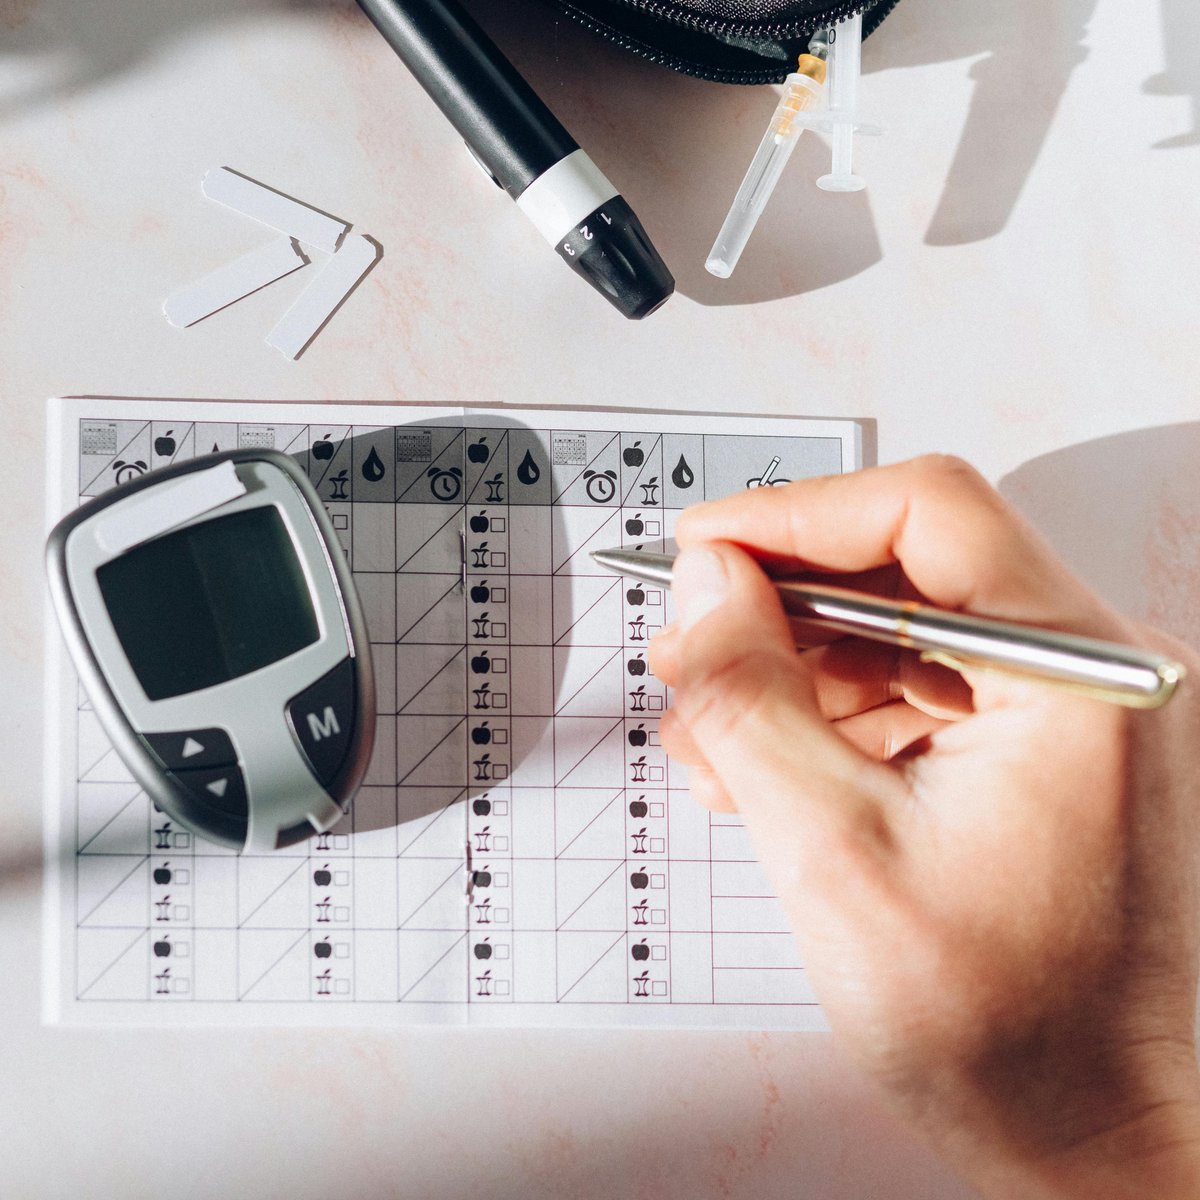 Using nearly 1.5 million health records from >350,000 older adults with diabetes in Hong Kong, Elaine Chow and colleagues investigate a novel machine learning model to predict risk of severe hypoglycaemia. @ElaineC48486251 @Aimin72766933 @CUHKMedicine doi.org/10.1371/journa…